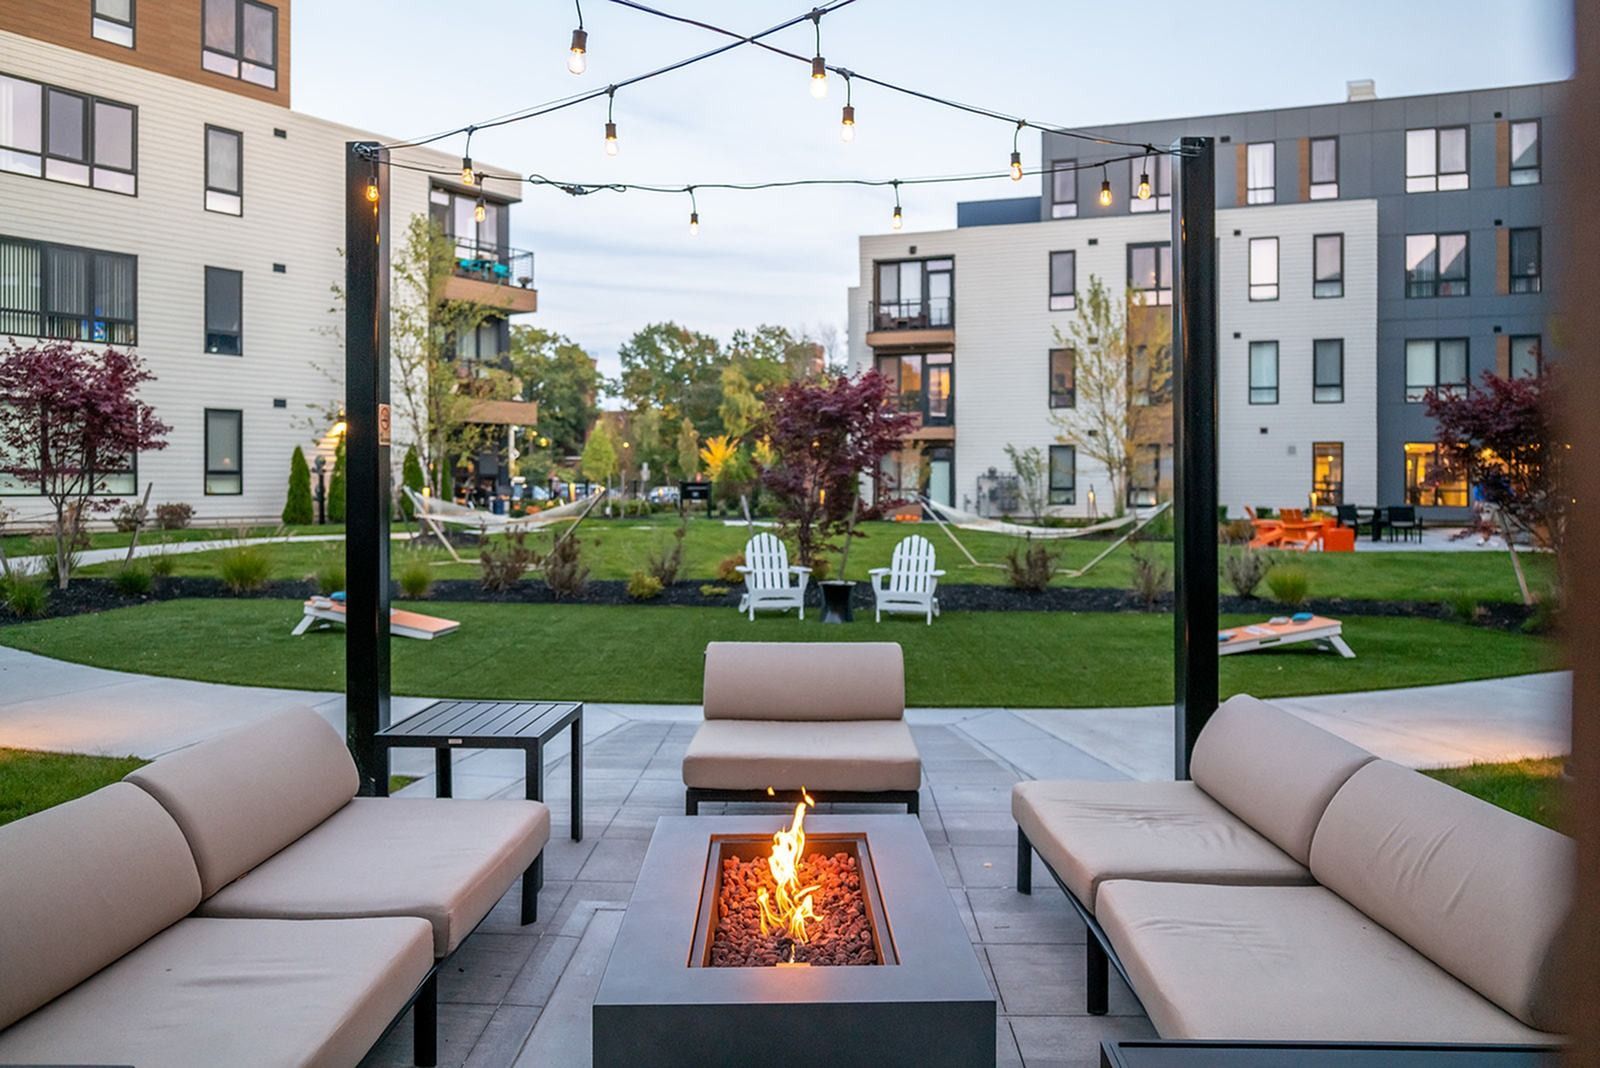 West End Yards outdoor lounge with fire pit and seating area. 